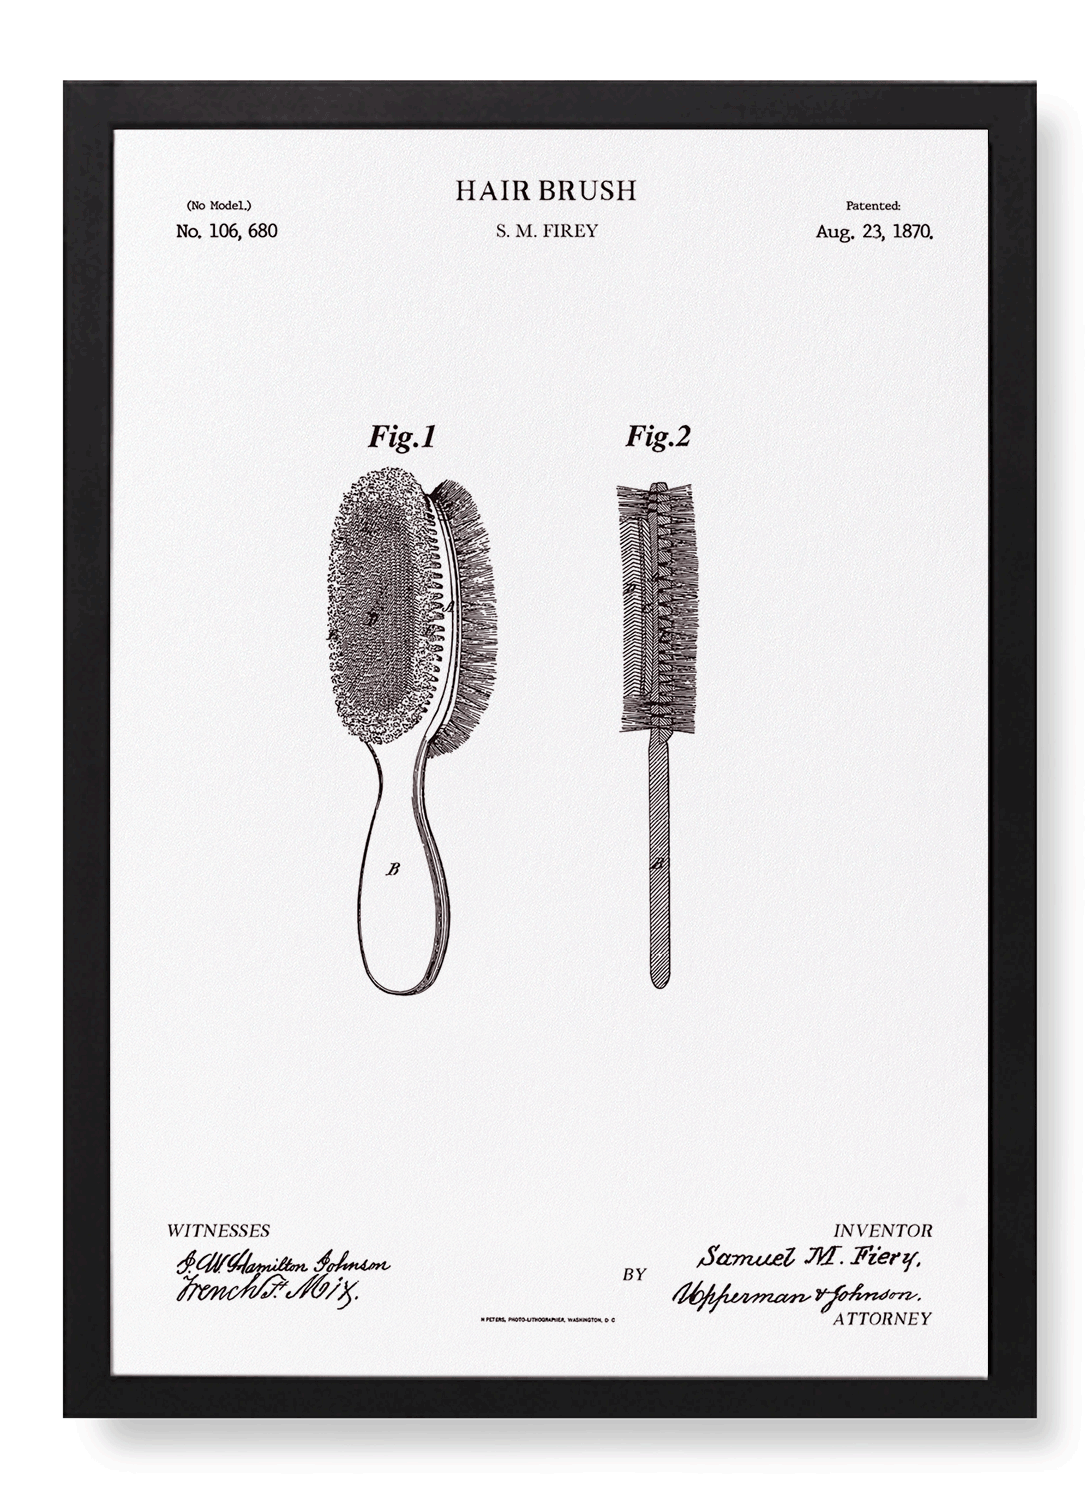 PATENT OF A HAIR BRUSH (1870)